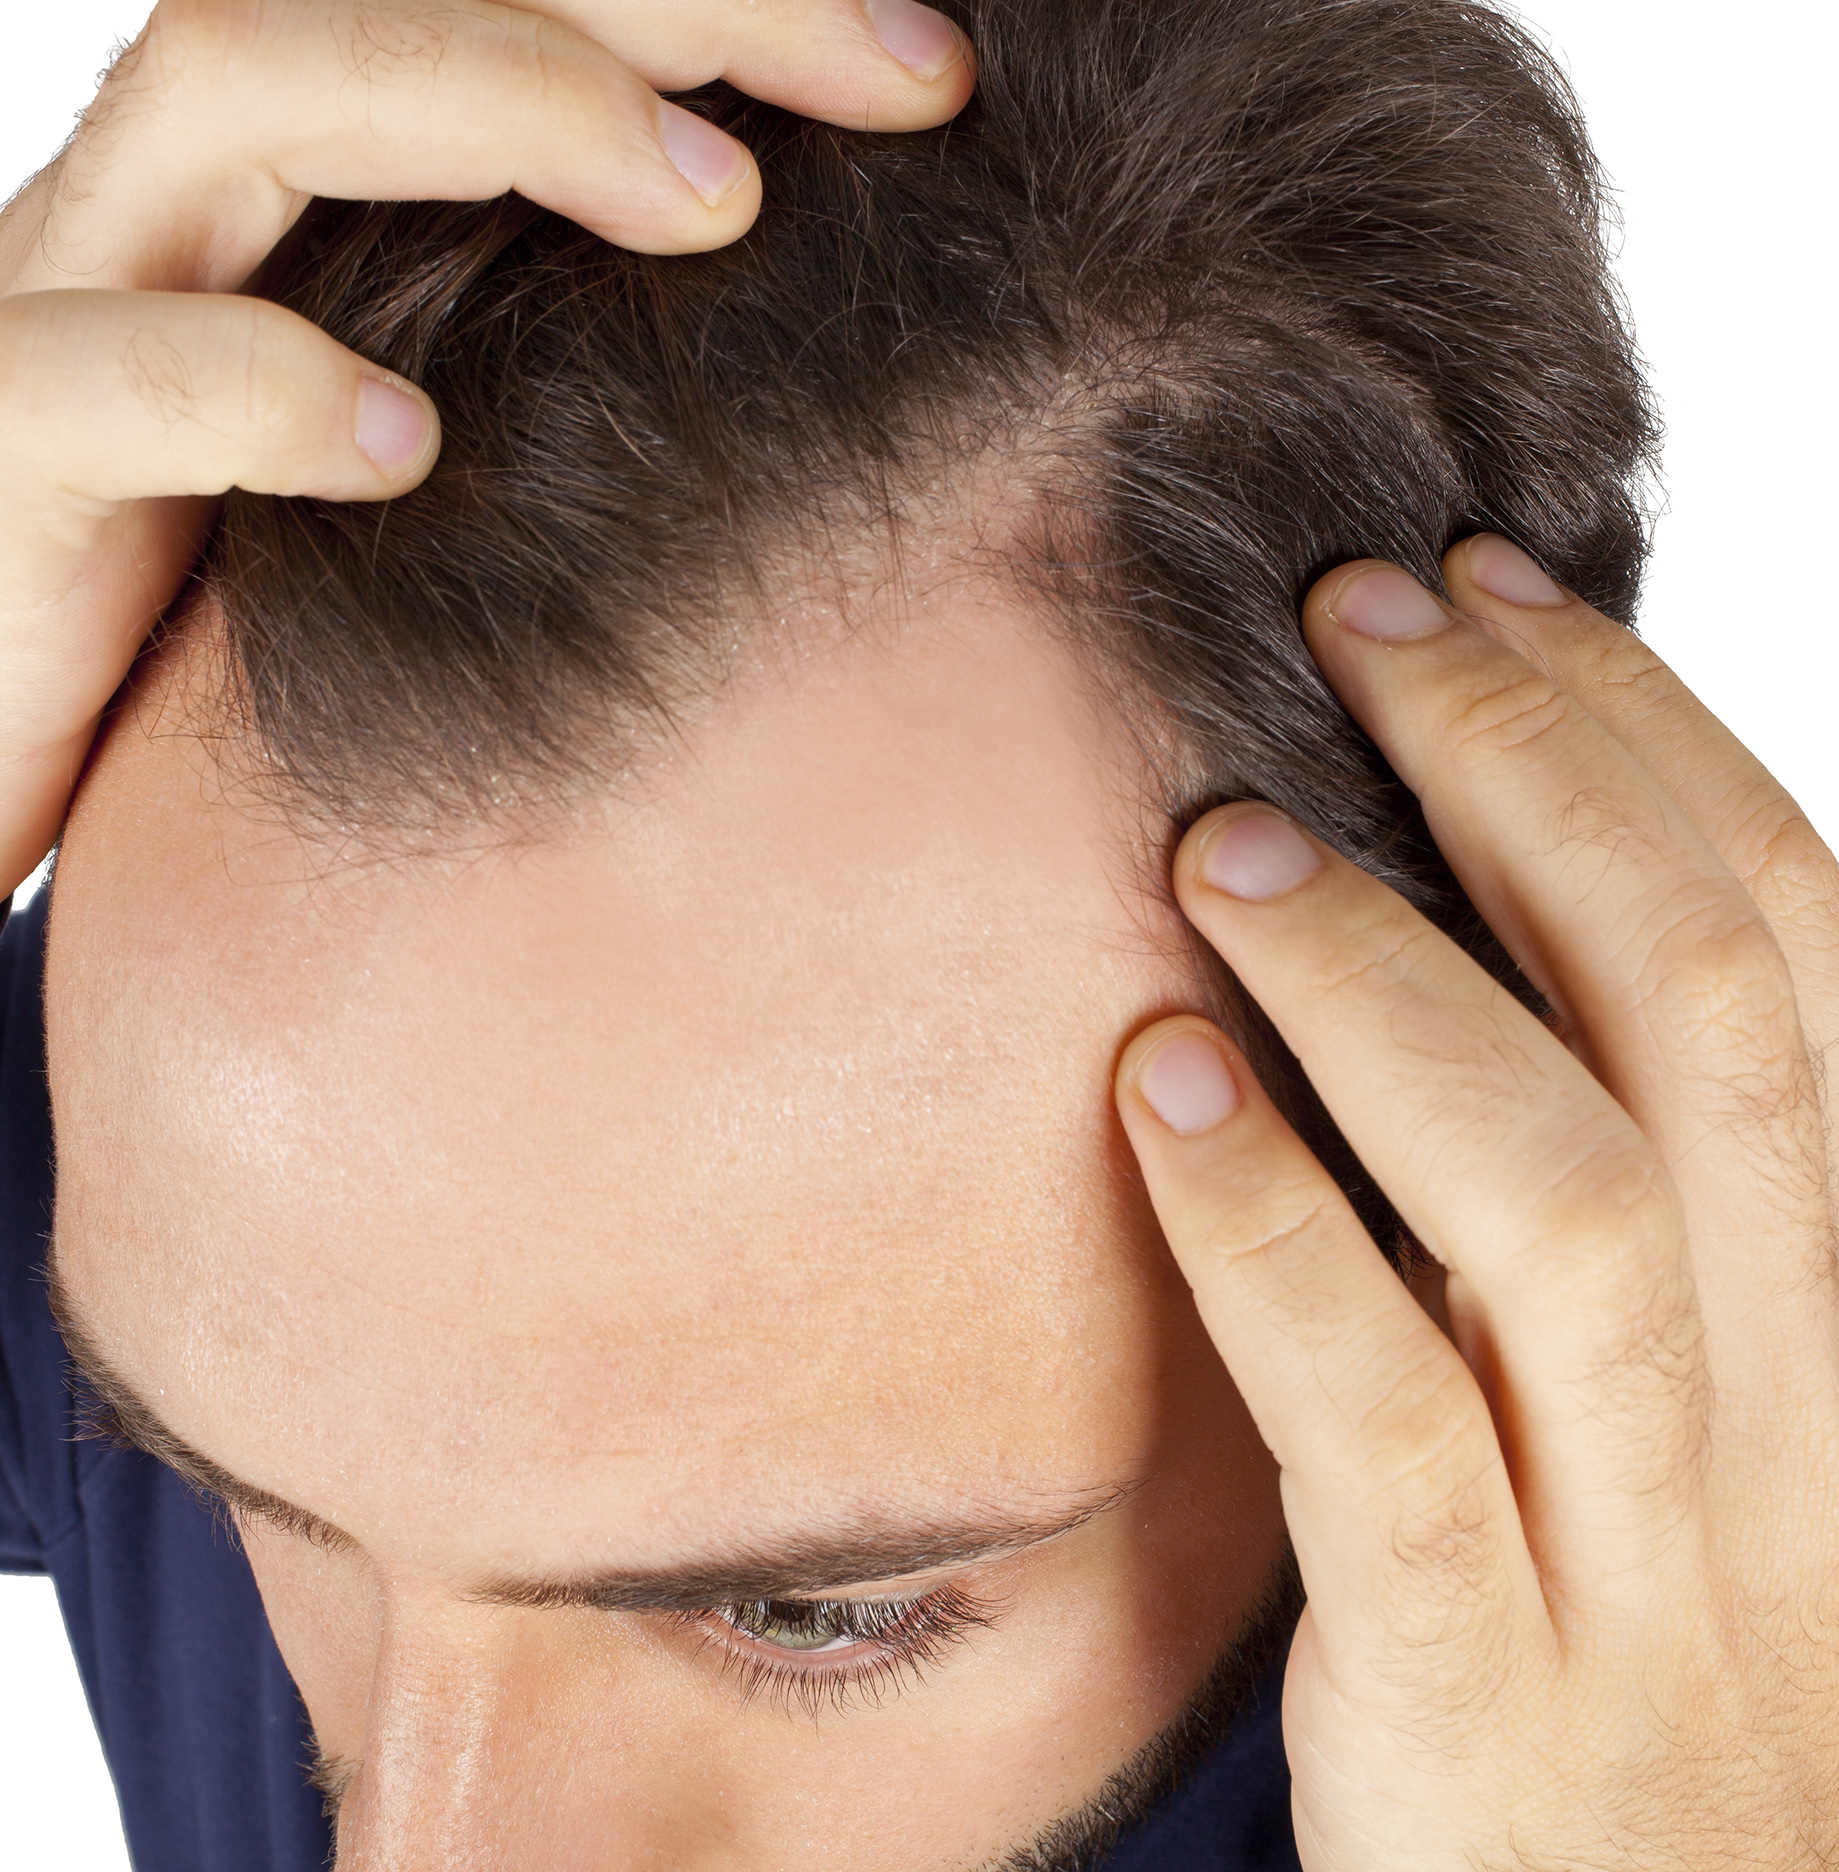 Men's Hair Loss: What You Need to Know